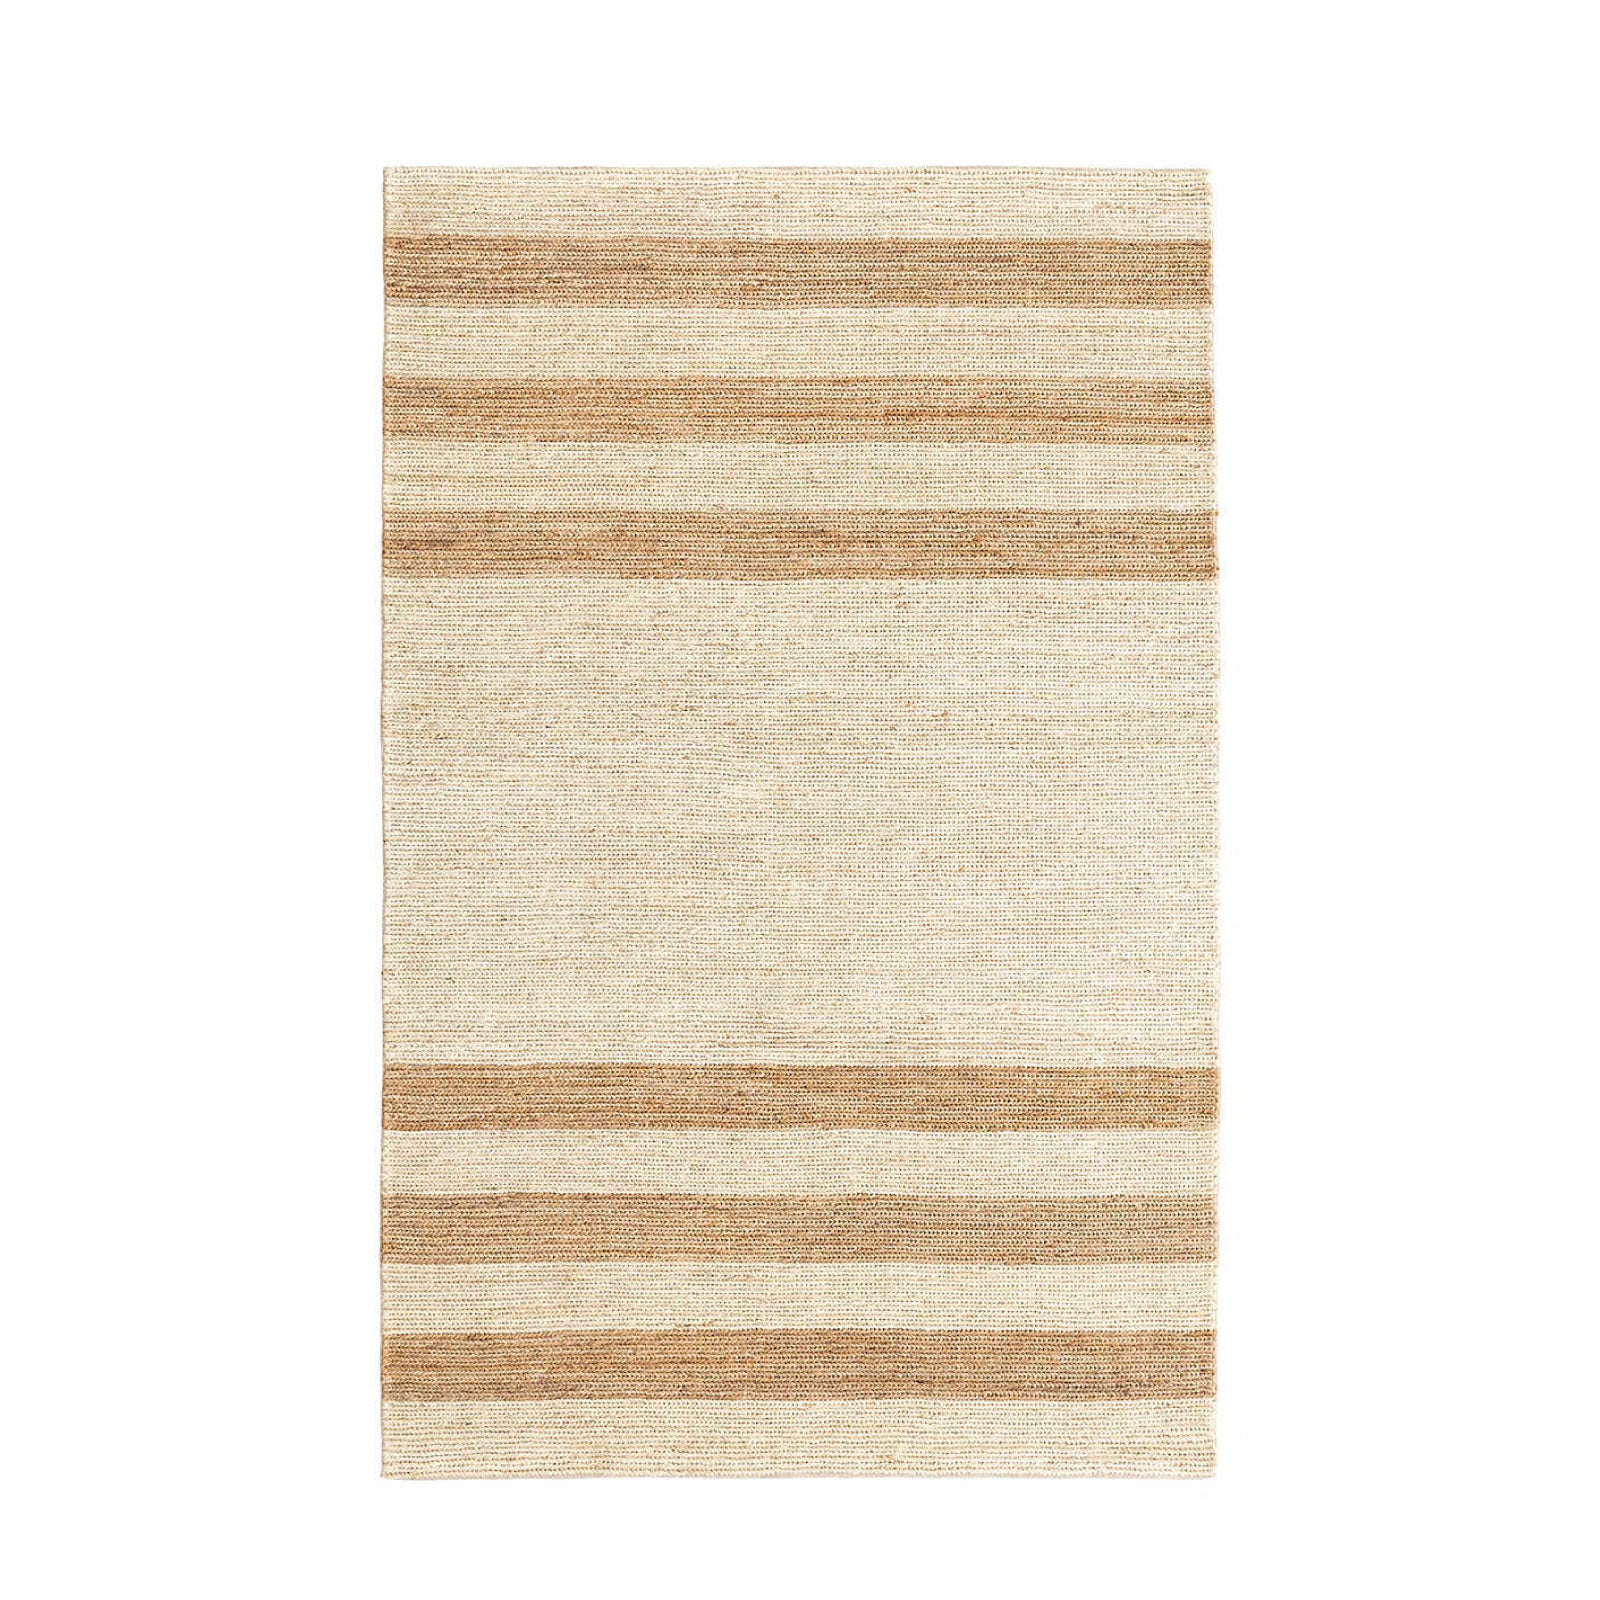 Williams Woven Jute Rug in Natural